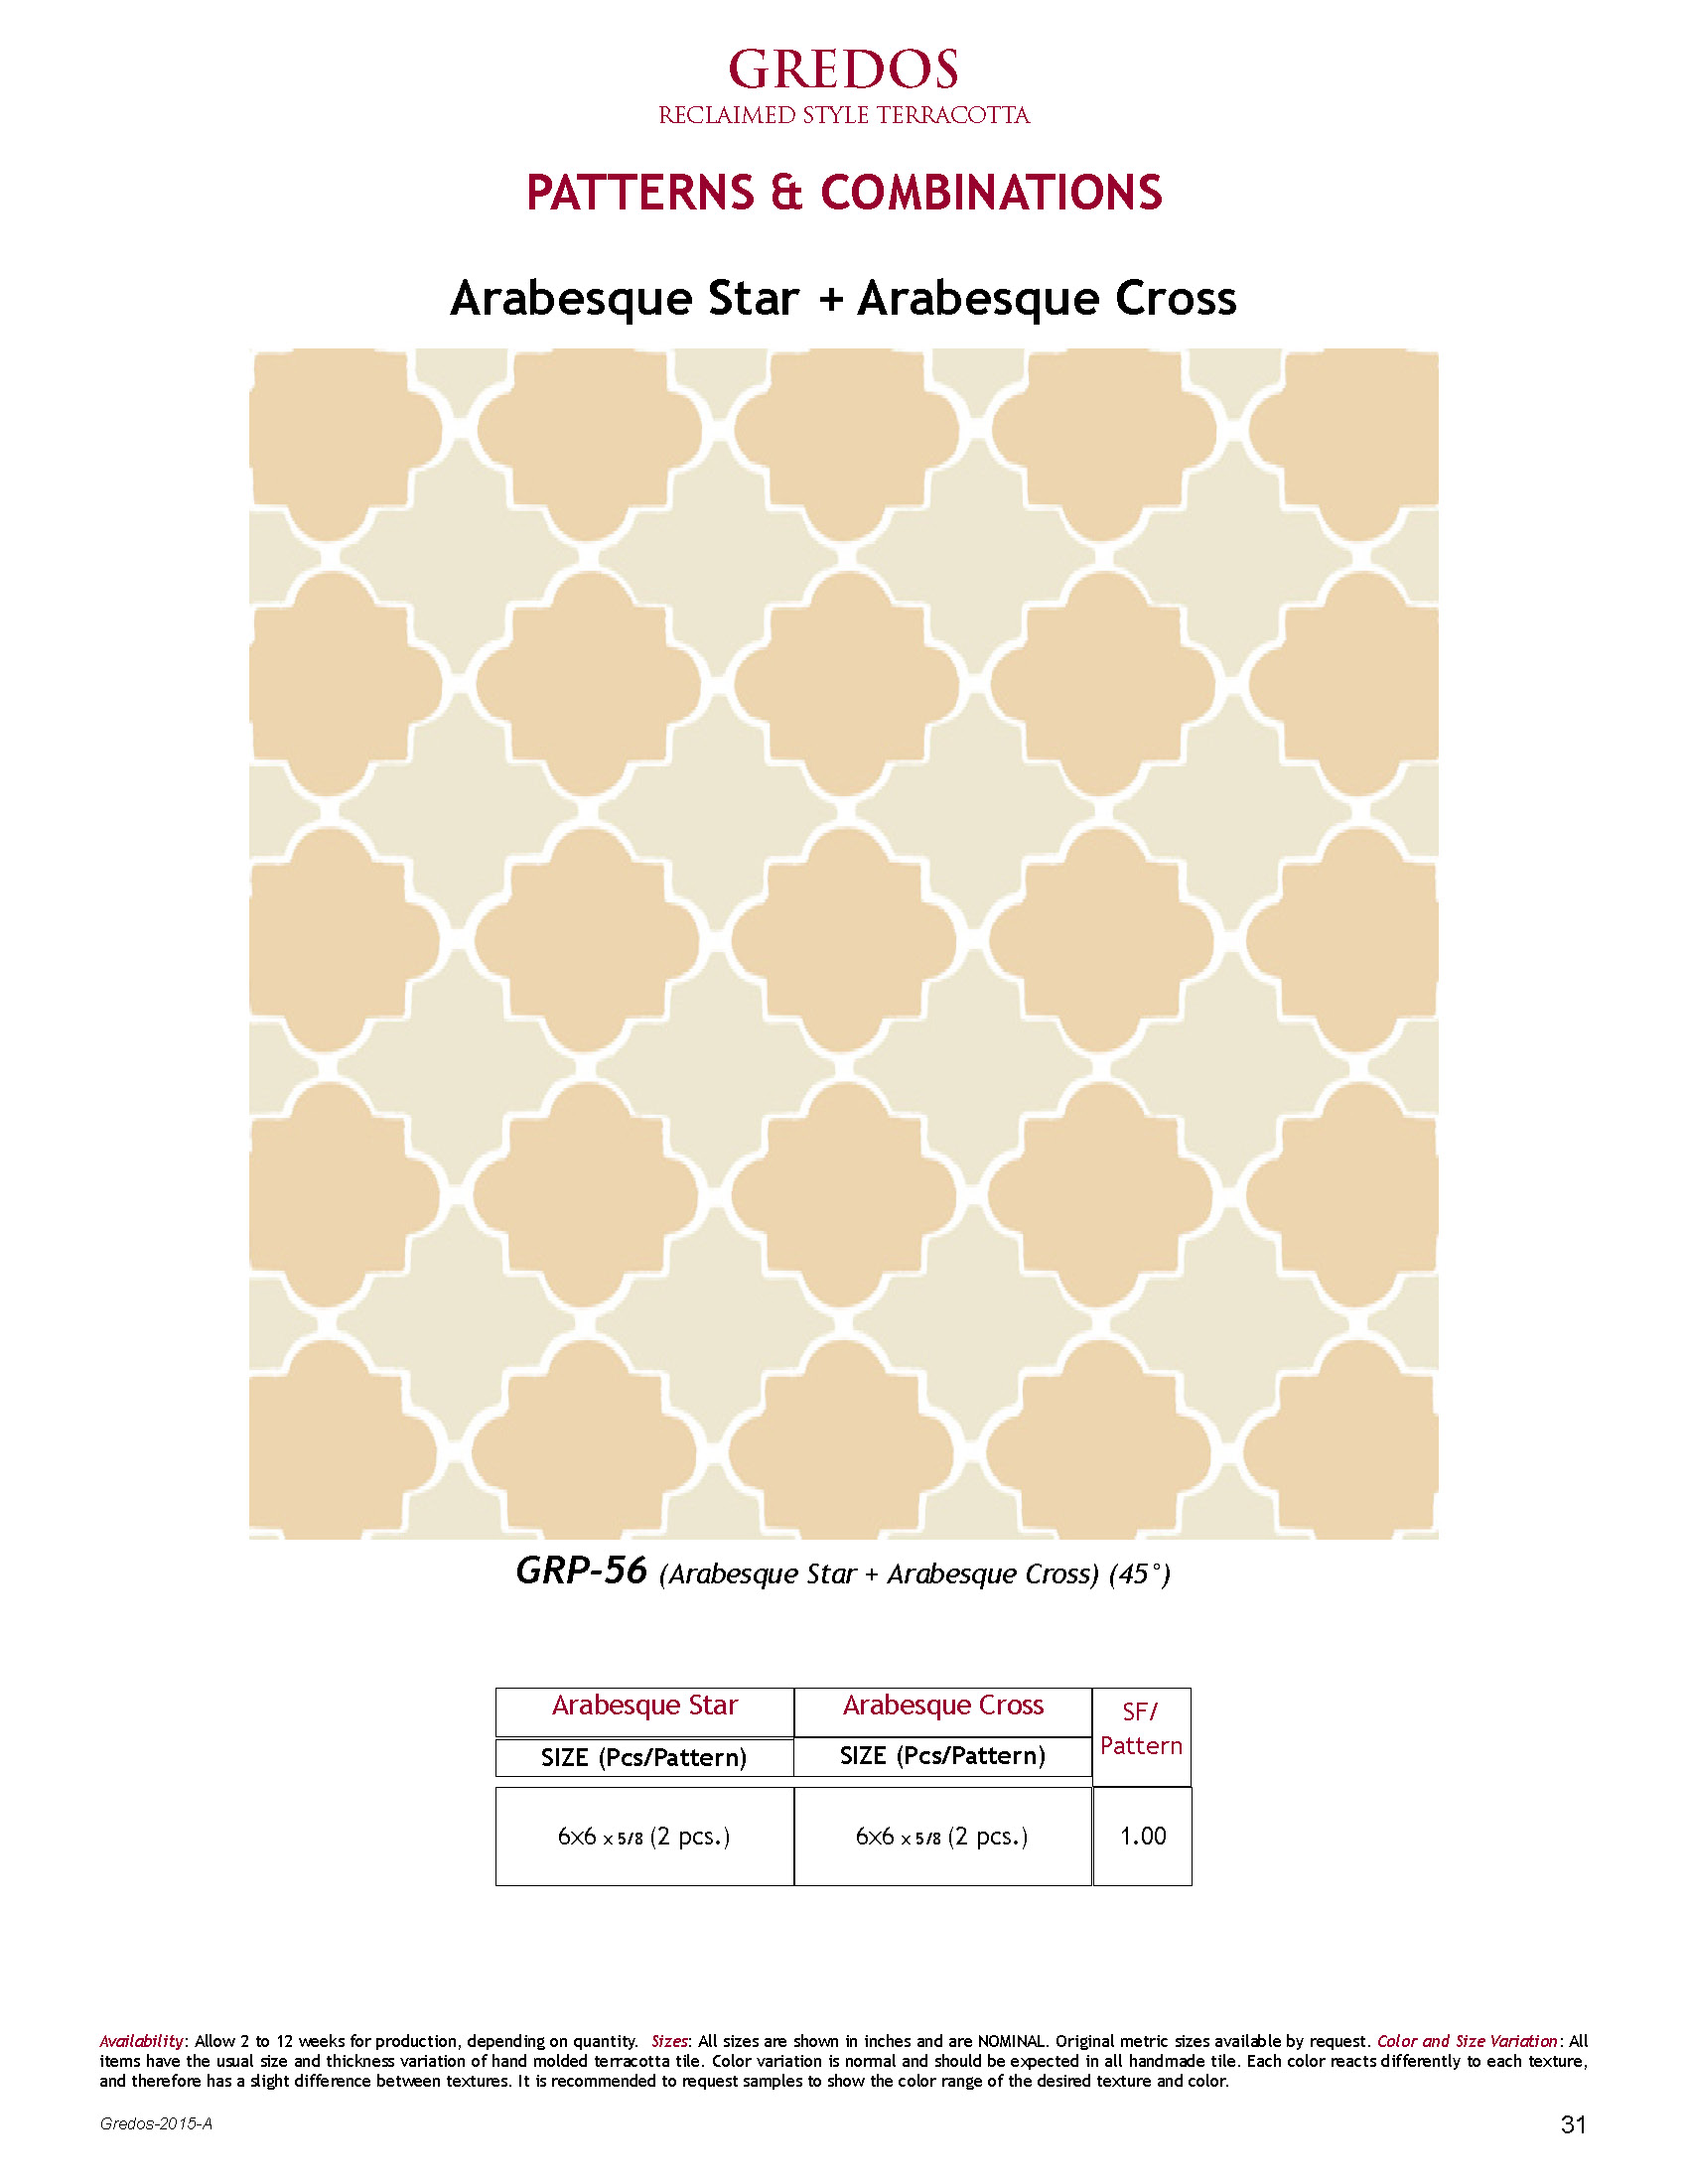 2-Gredos-Patterns&Combinations2015-A_Page_31.jpg